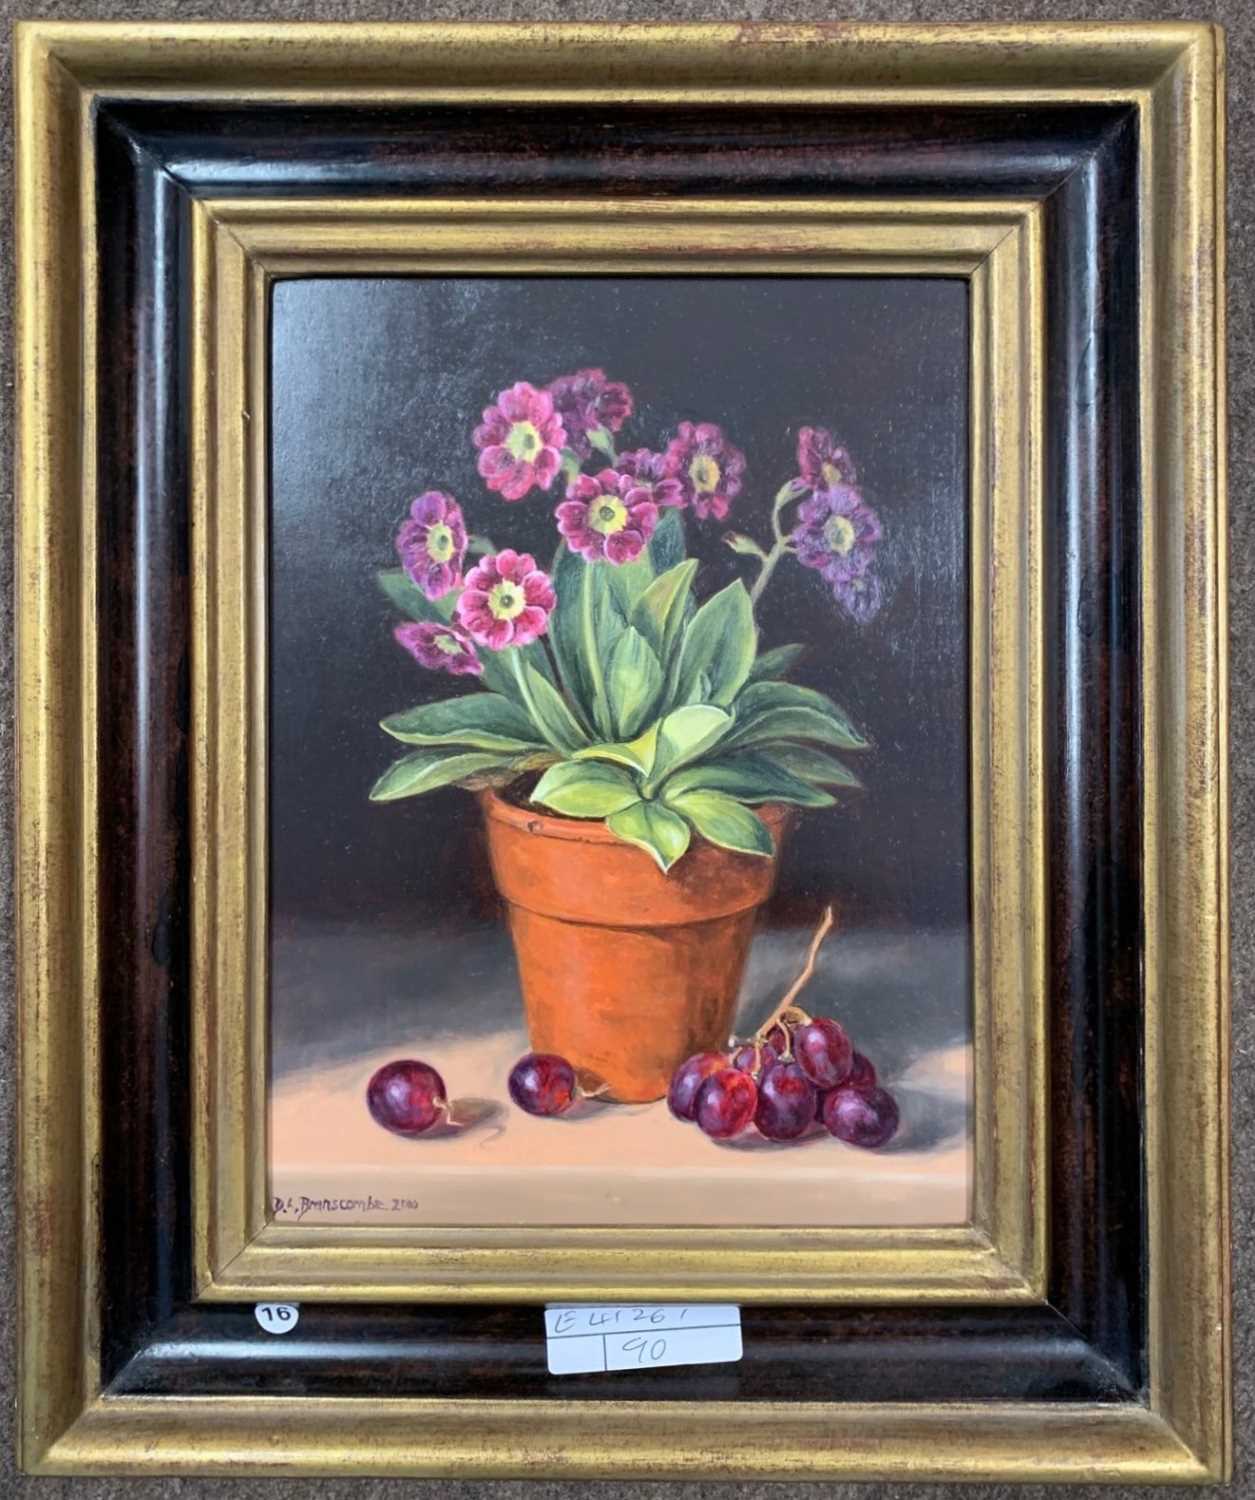 Dianne Branscombe (British, b.1959), 'Auricula', oil on board, signed and dated 2000,16x22cm,